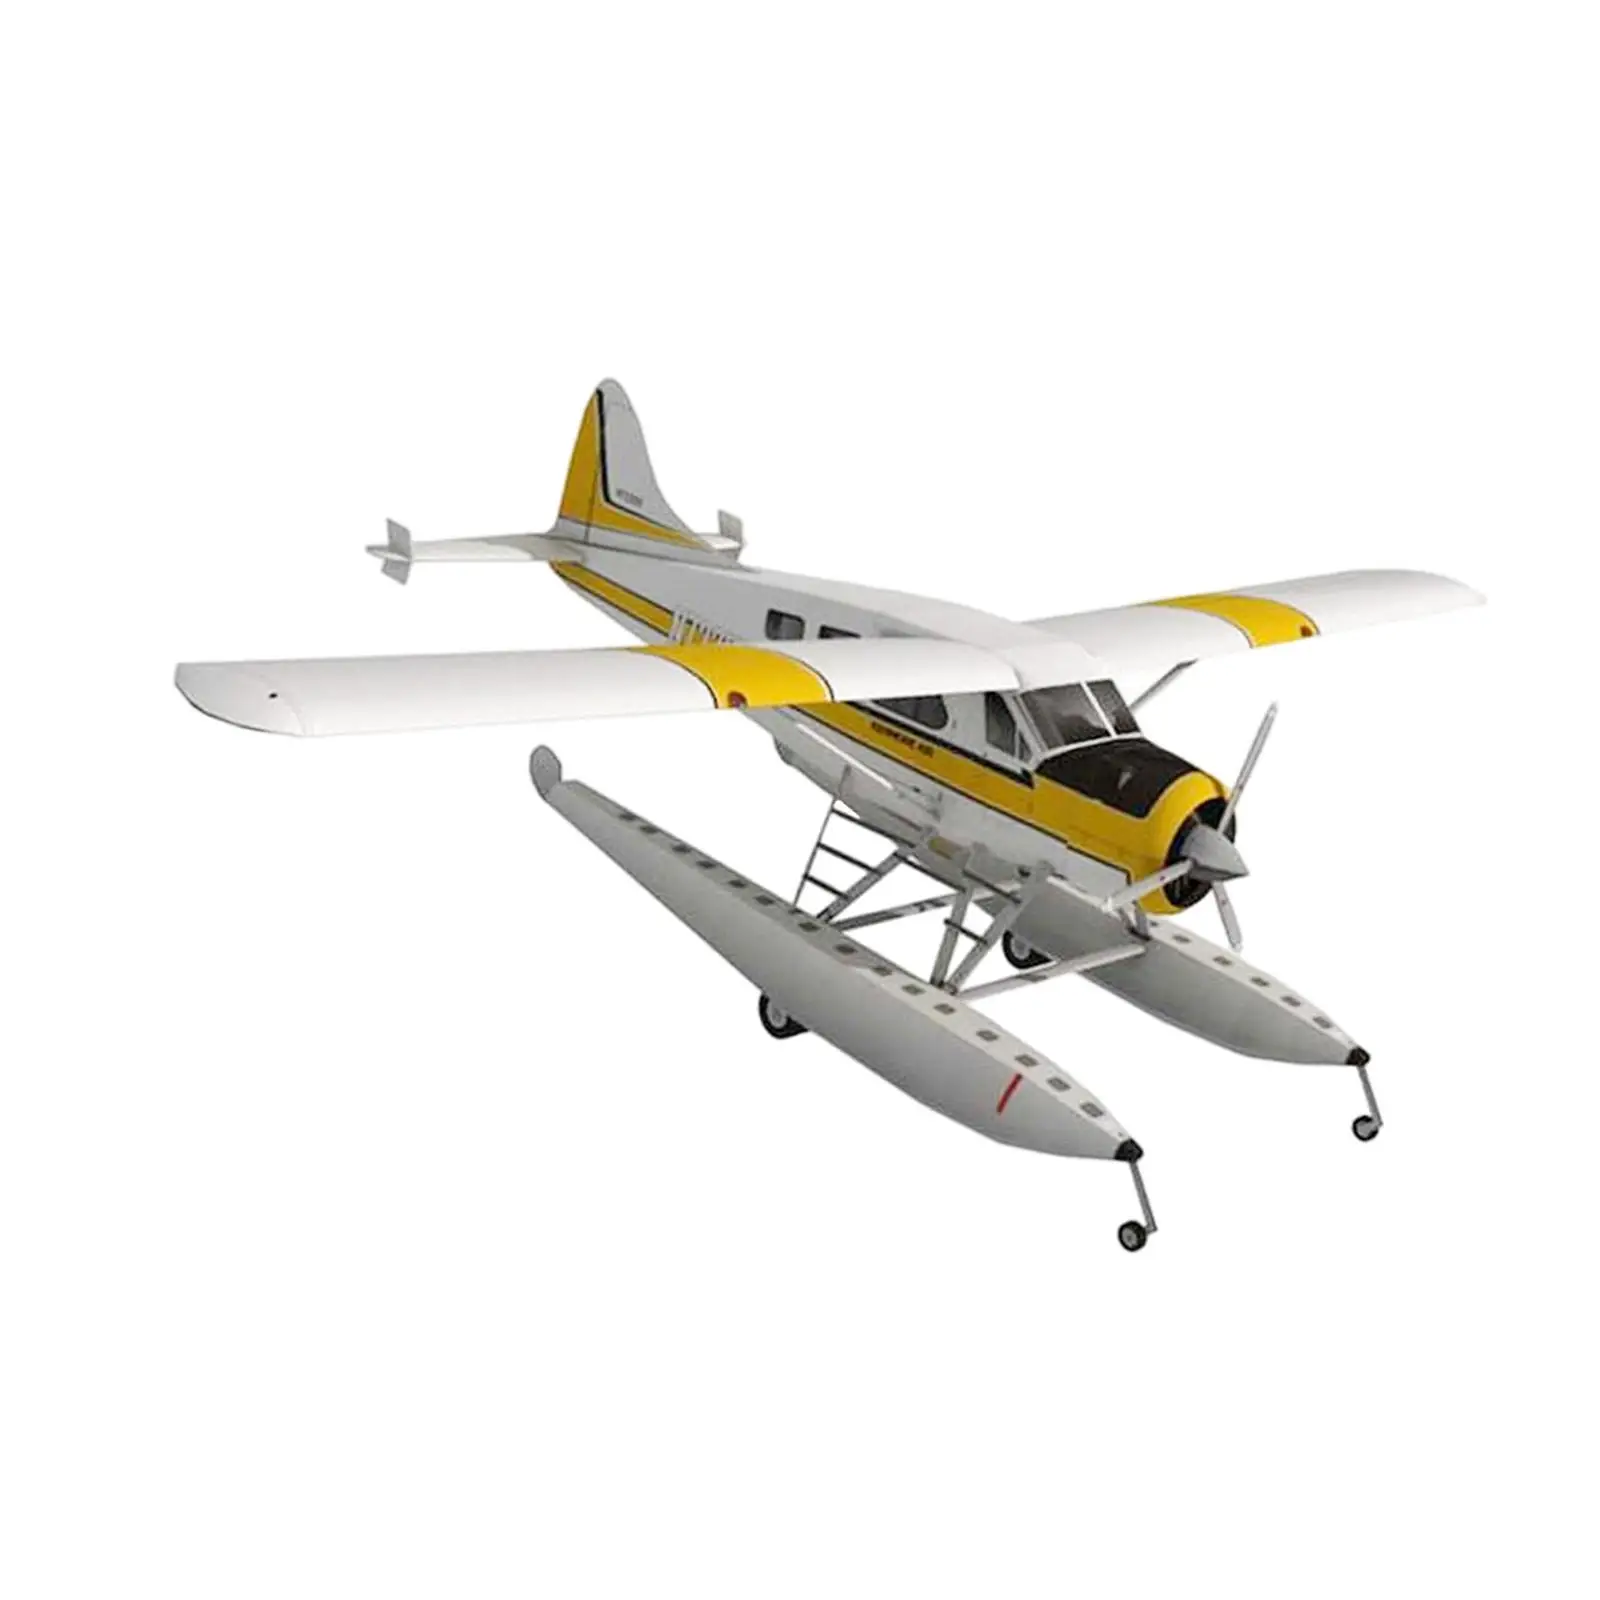 1:32 Seaplane Model Collections Desk Decoration Paper Airplane Model Kits 3D Puzzle for Men Women Adults Kids Gifts